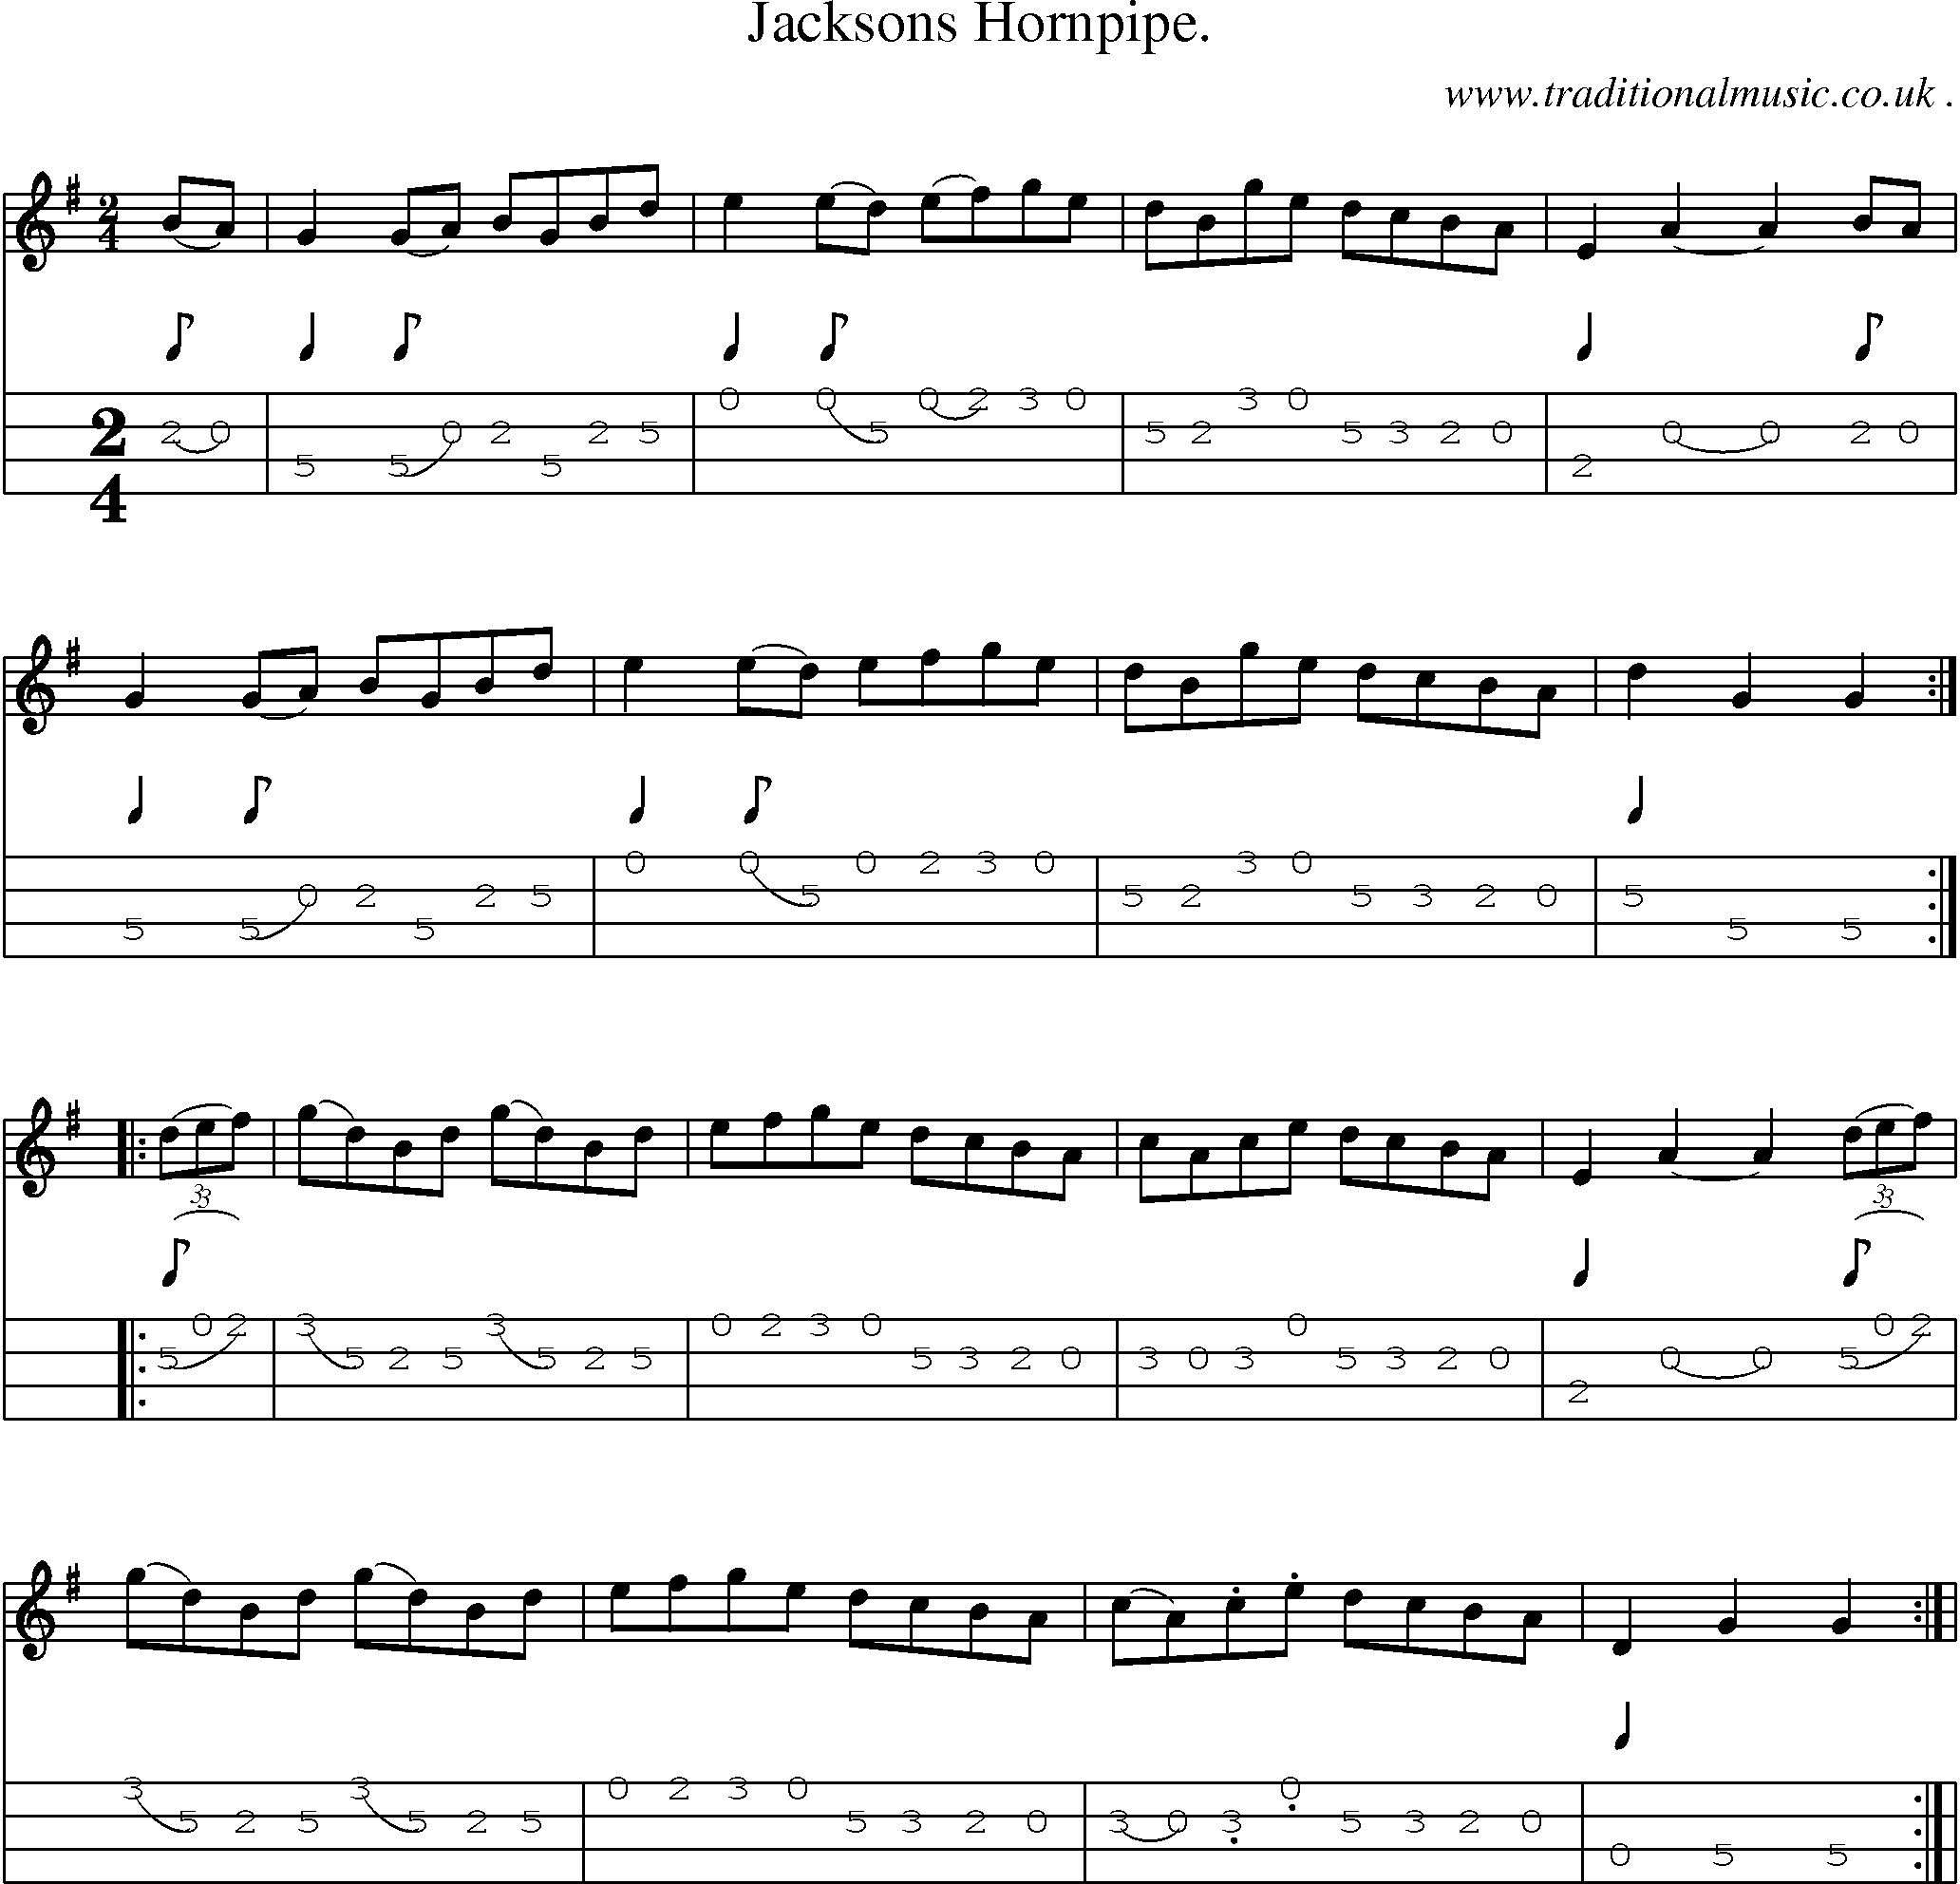 Sheet-Music and Mandolin Tabs for Jacksons Hornpipe